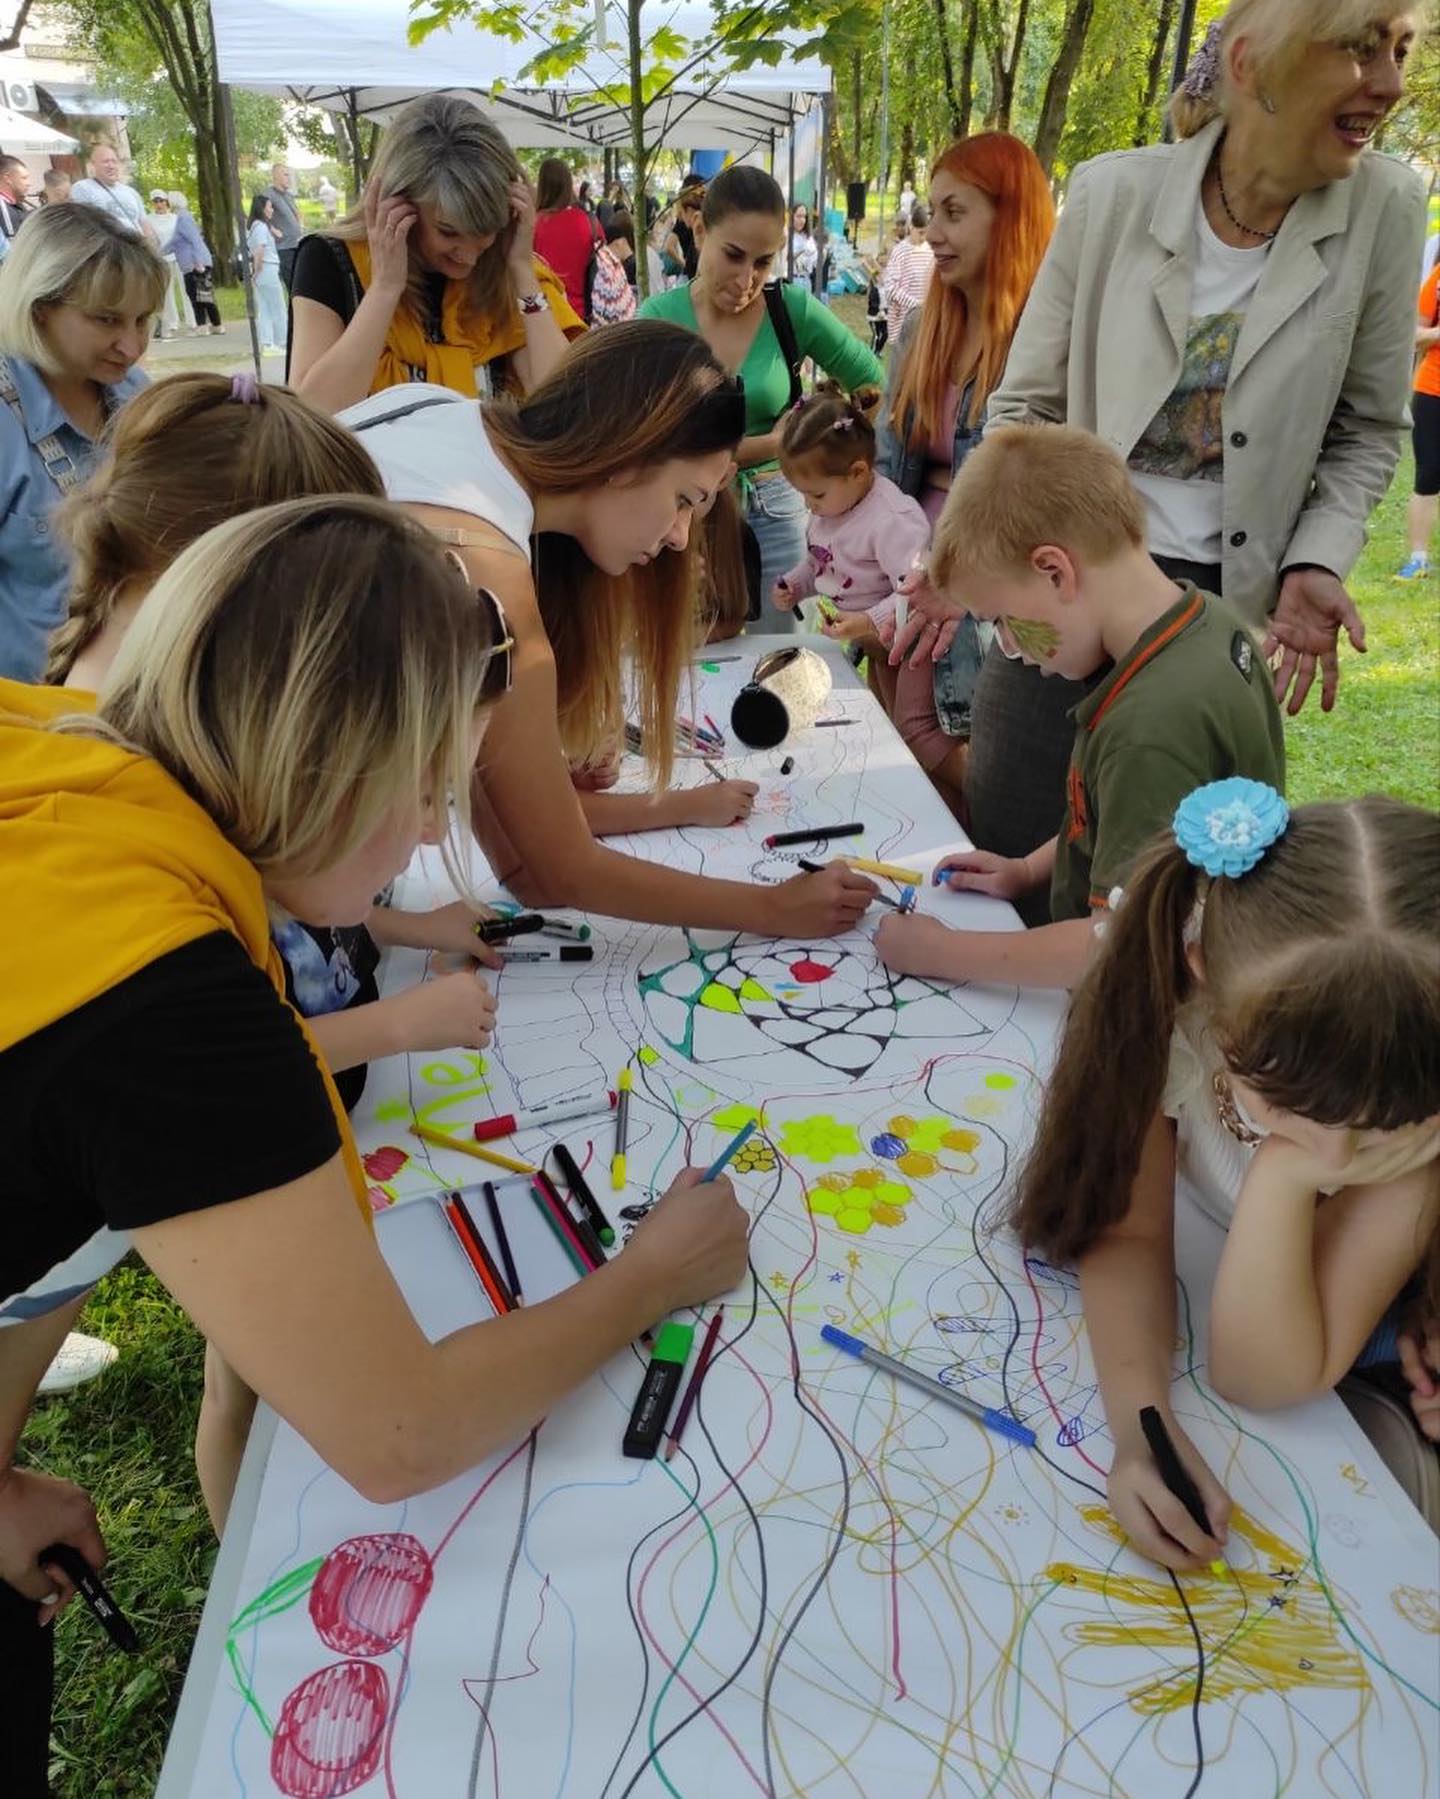 A group of children drawing on a table in a park.